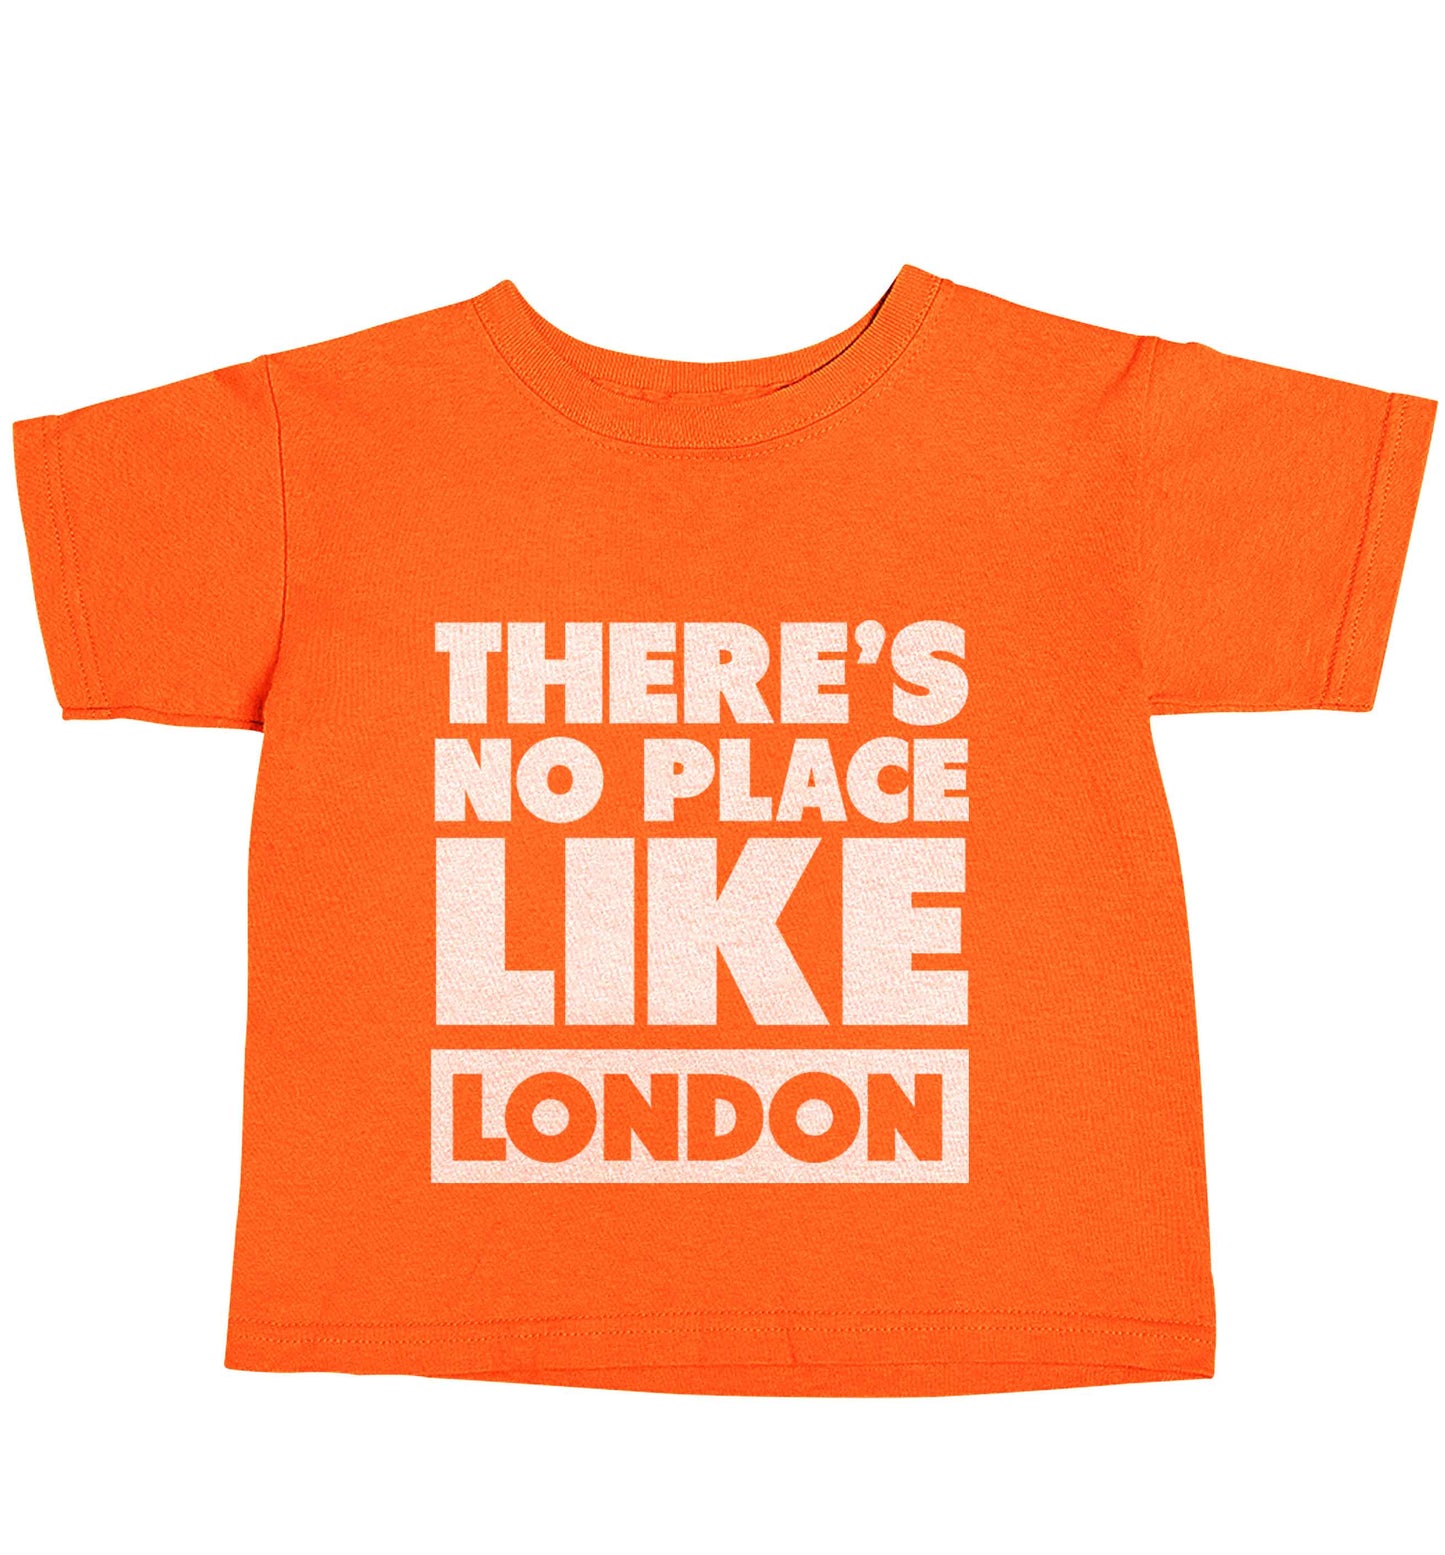 There's no place like England orange baby toddler Tshirt 2 Years